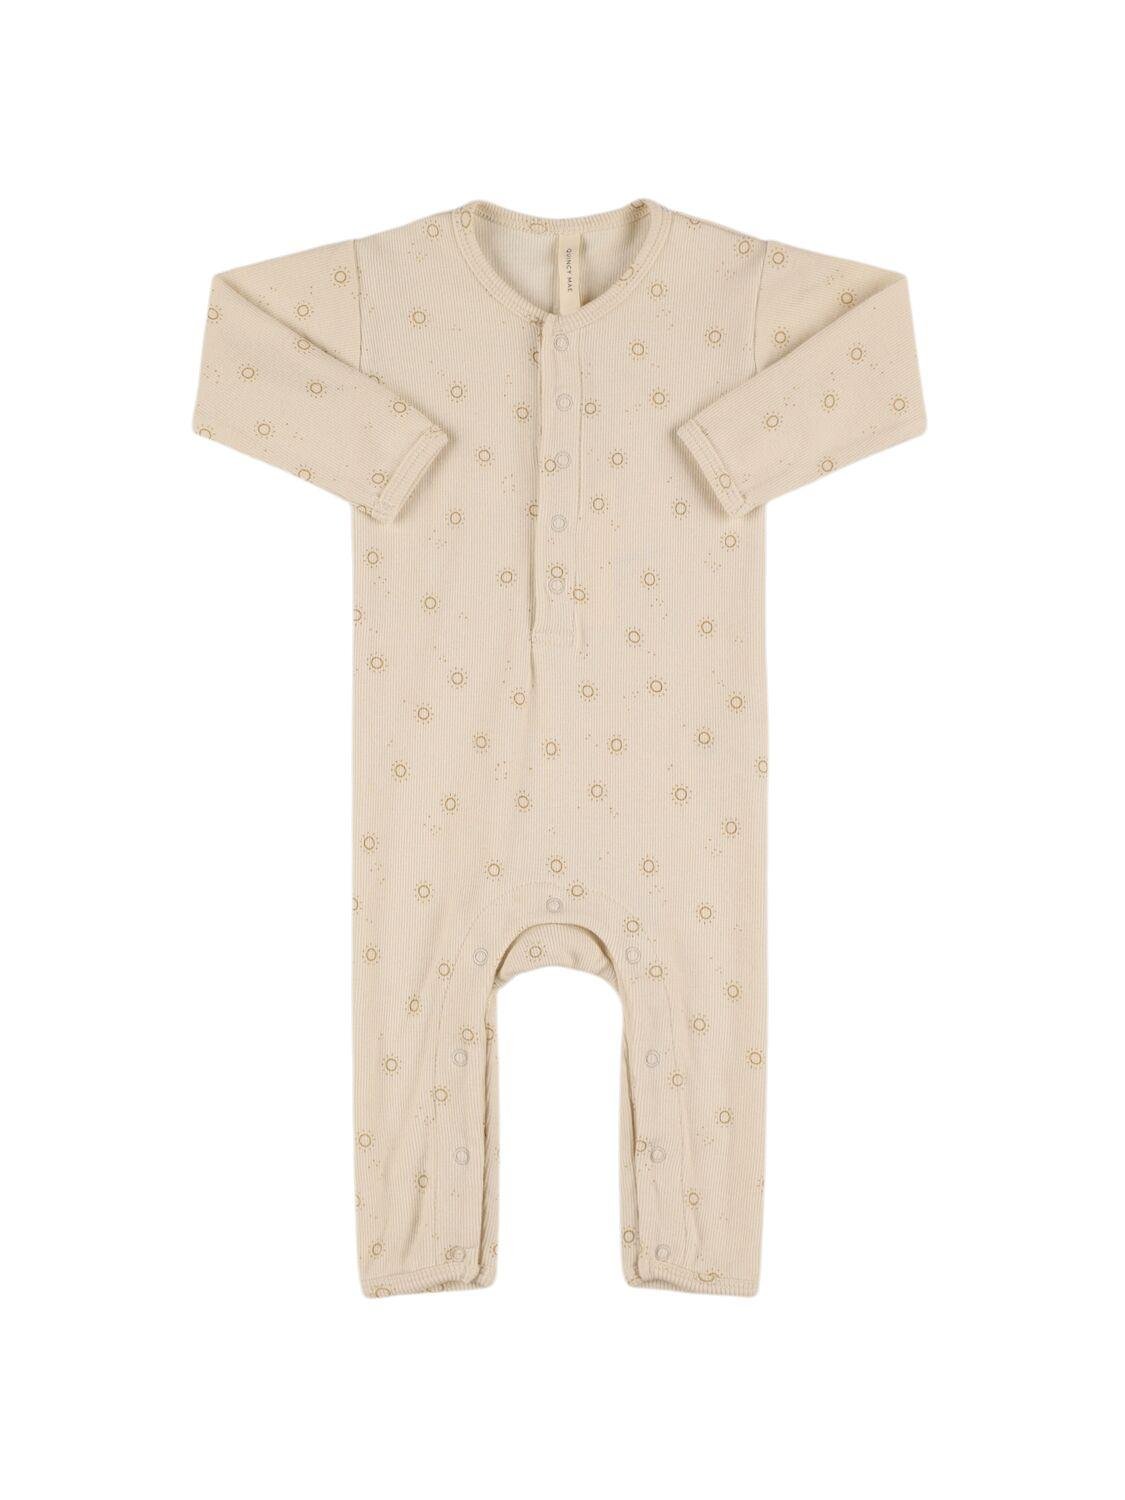 Printed Organic Cotton Romper by QUINCY MAE